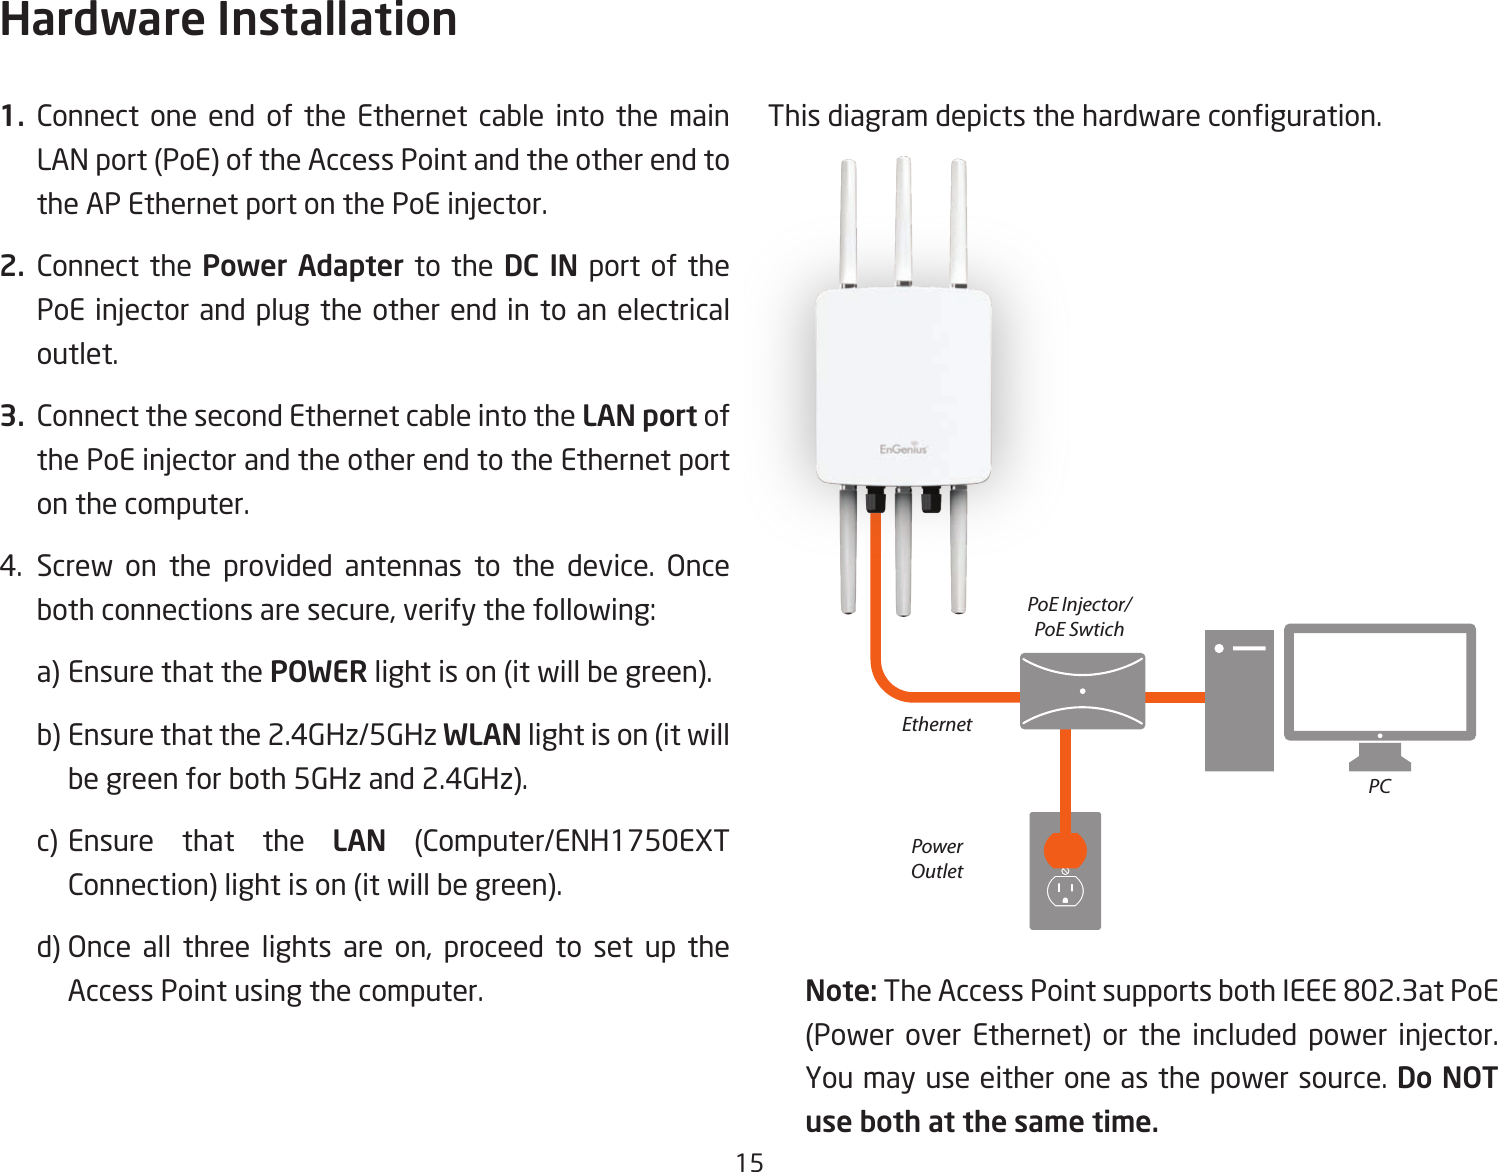 151. Connect one end of the Ethernet cable into the main LAN port (PoE) of the Access Point and the other end to theAPEthernetportonthePoEinjector.2. Connect the Power Adapter to the DC IN port of the PoEinjectorandplugtheotherend in toanelectricaloutlet.3.  Connect the second Ethernet cable into the LAN port of thePoEinjectorandtheotherendtotheEthernetporton the computer.4. Screw on the provided antennas to the device. Onceboth connections are secure, verify the following:    a) Ensure that the POWER light is on (it will be green).    b) Ensure that the 2.4GHz/5GHz WLAN light is on (it will   be green for both 5GHz and 2.4GHz).  c) Ensure that the LAN (Computer/ENH1750EXT    Connection) light is on (it will be green).  d)Once all three lights are on, proceed to set up the   Access Point using the computer.Thisdiagramdepictsthehardwareconguration.Note: TheAccessPointsupportsbothIEEE802.3atPoE(Power over Ethernet) or the included power injector.You may use either one as the power source. Do NOT use both at the same time.Hardware InstallationEthernetPCPowerOutletPoE Injector/PoE Swtich